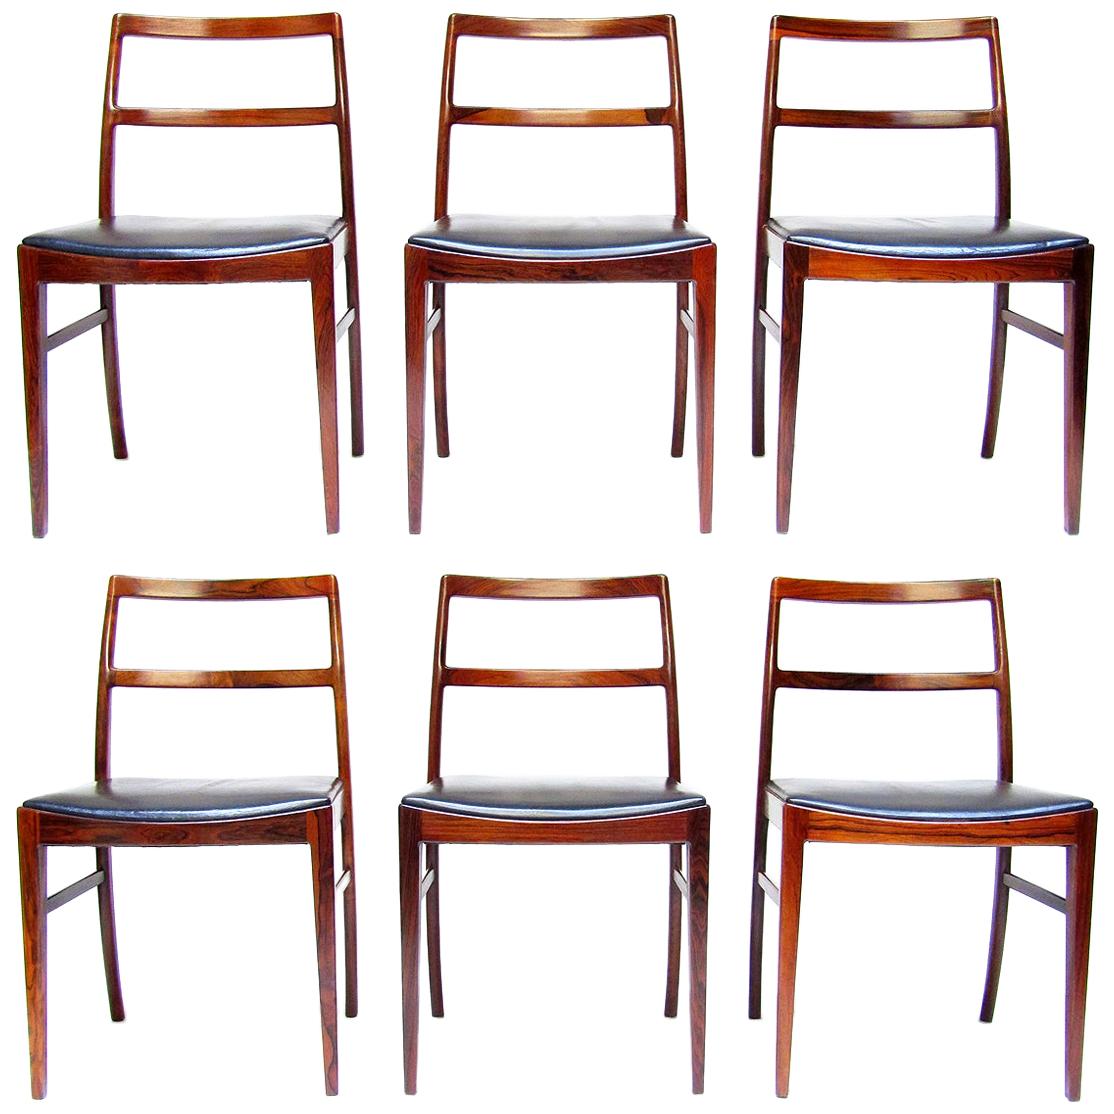 Six Danish "430" Dining Chairs in Rosewood by Arne Vodder for Sibast